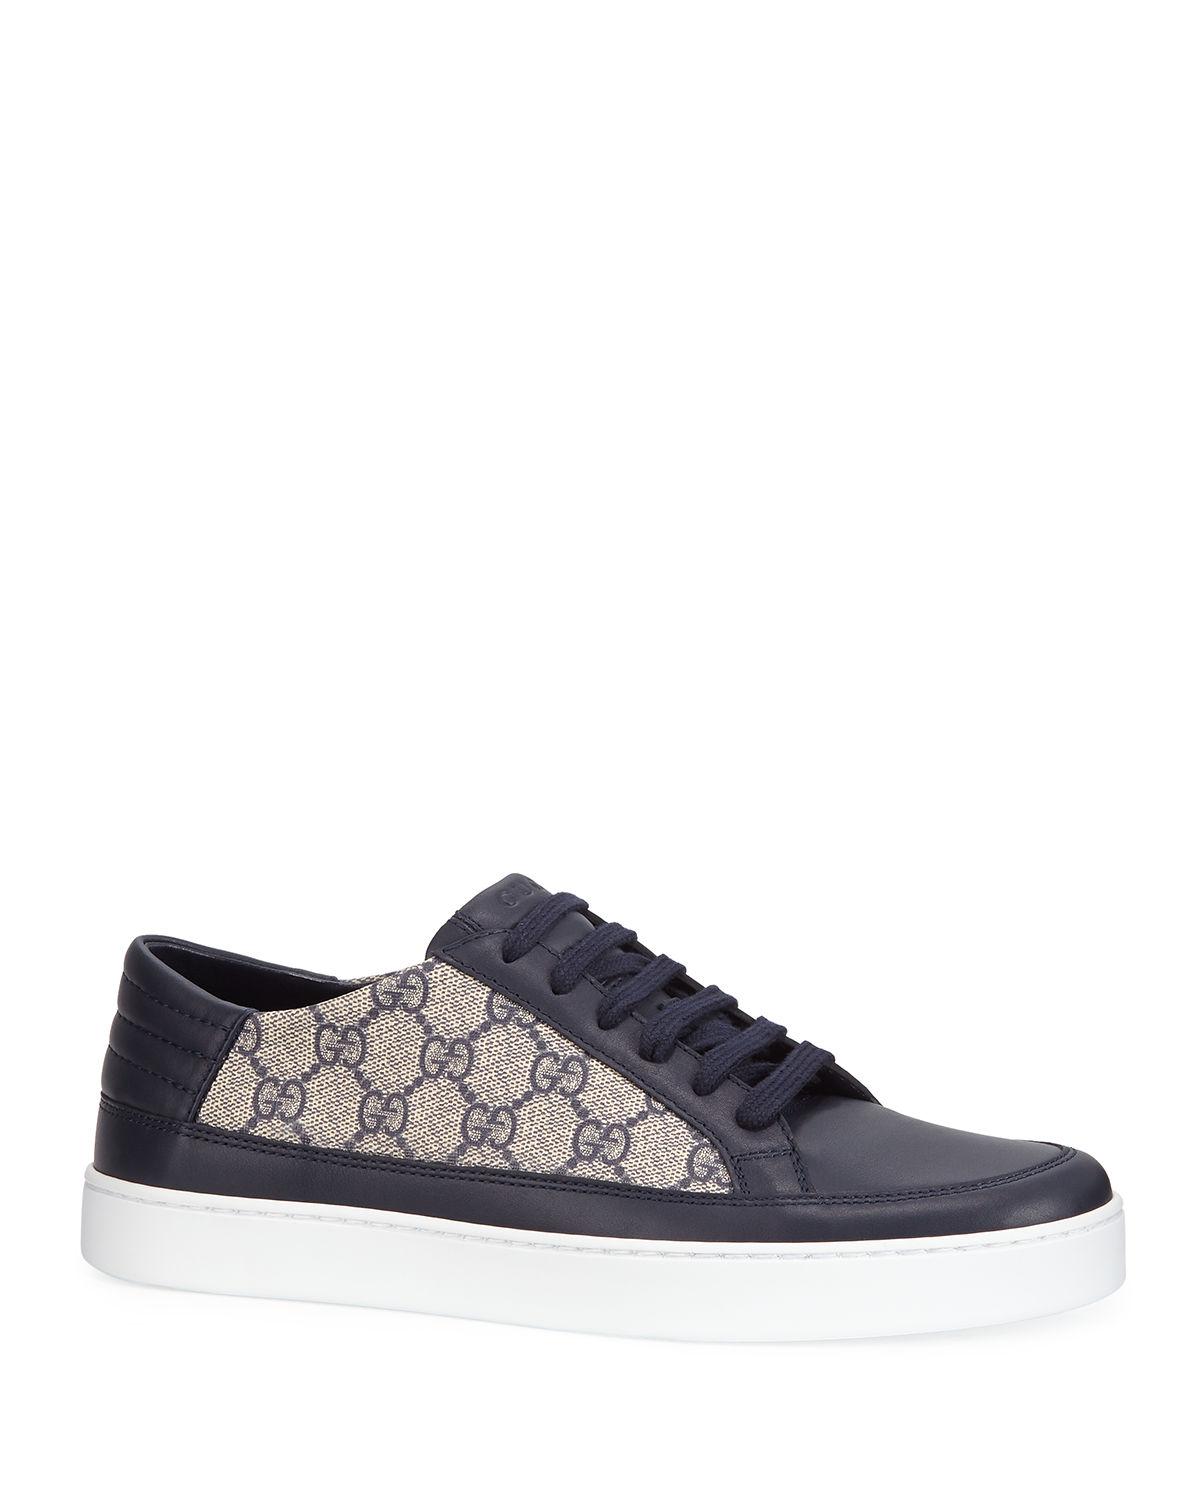 mens blue gucci sneakers